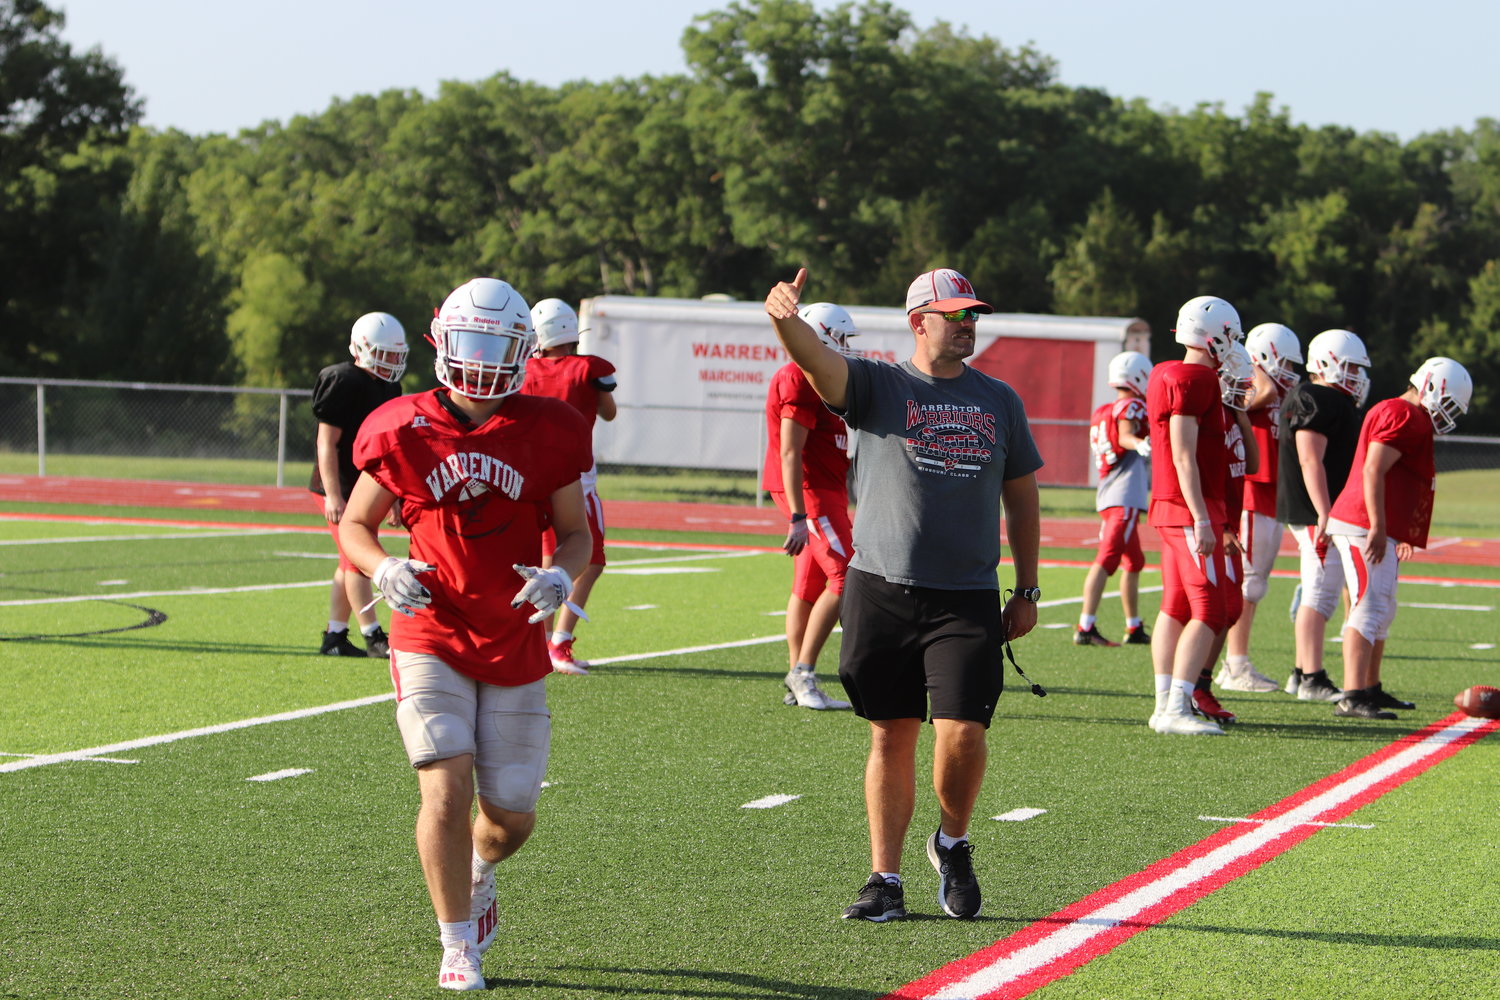 Warrenton football players participated in the high school football camp last week. In the photo, head coach Jason Koper coaches the team during the last day of camp.